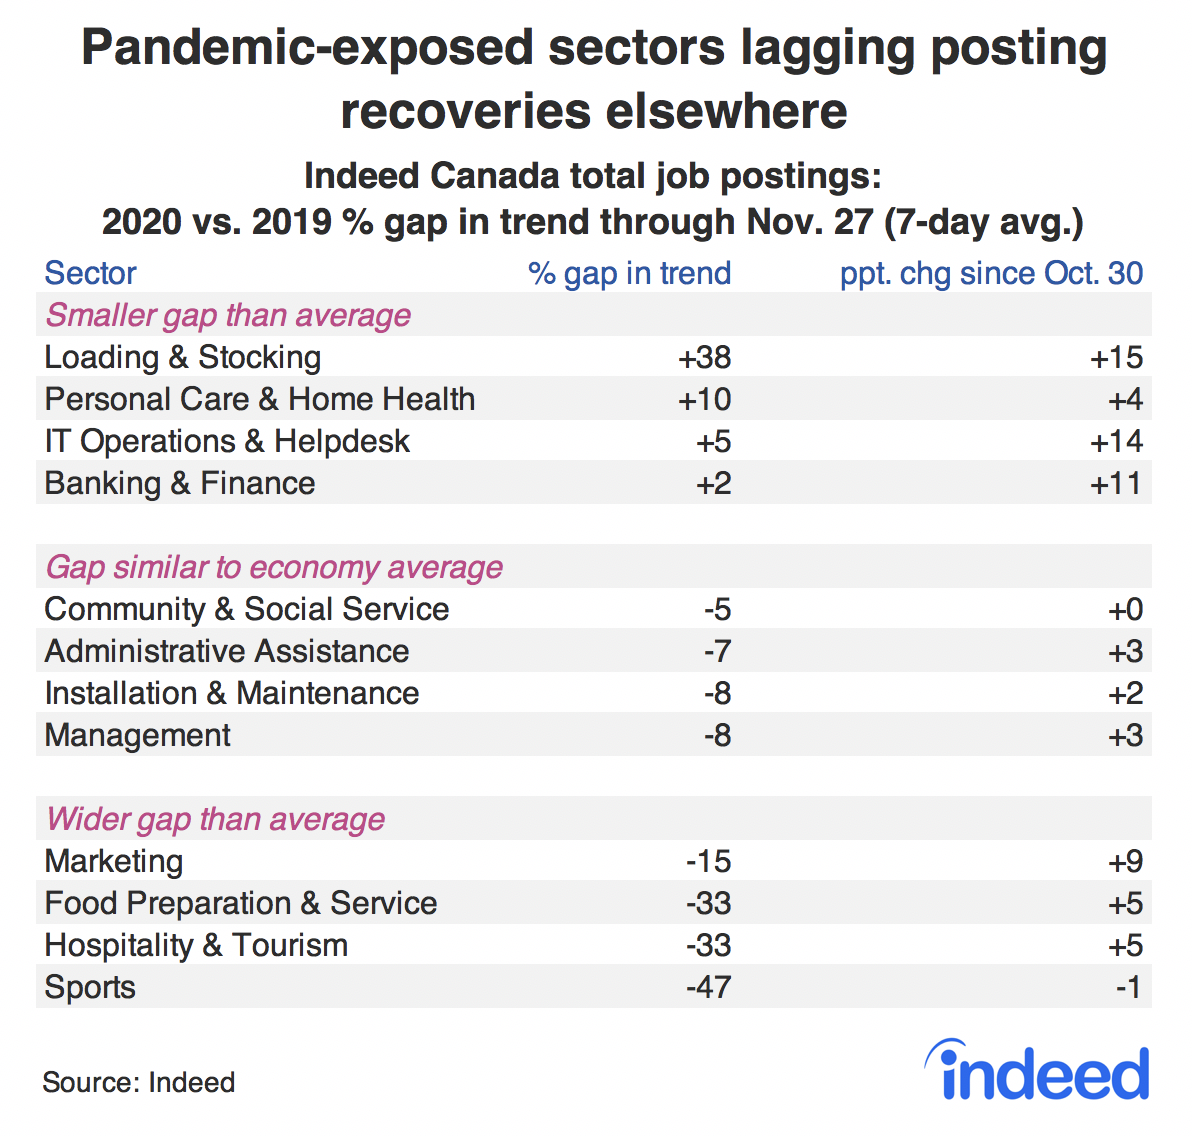 Table showing pandemic-exposed sectors lagging posting recoveries elsewhere.